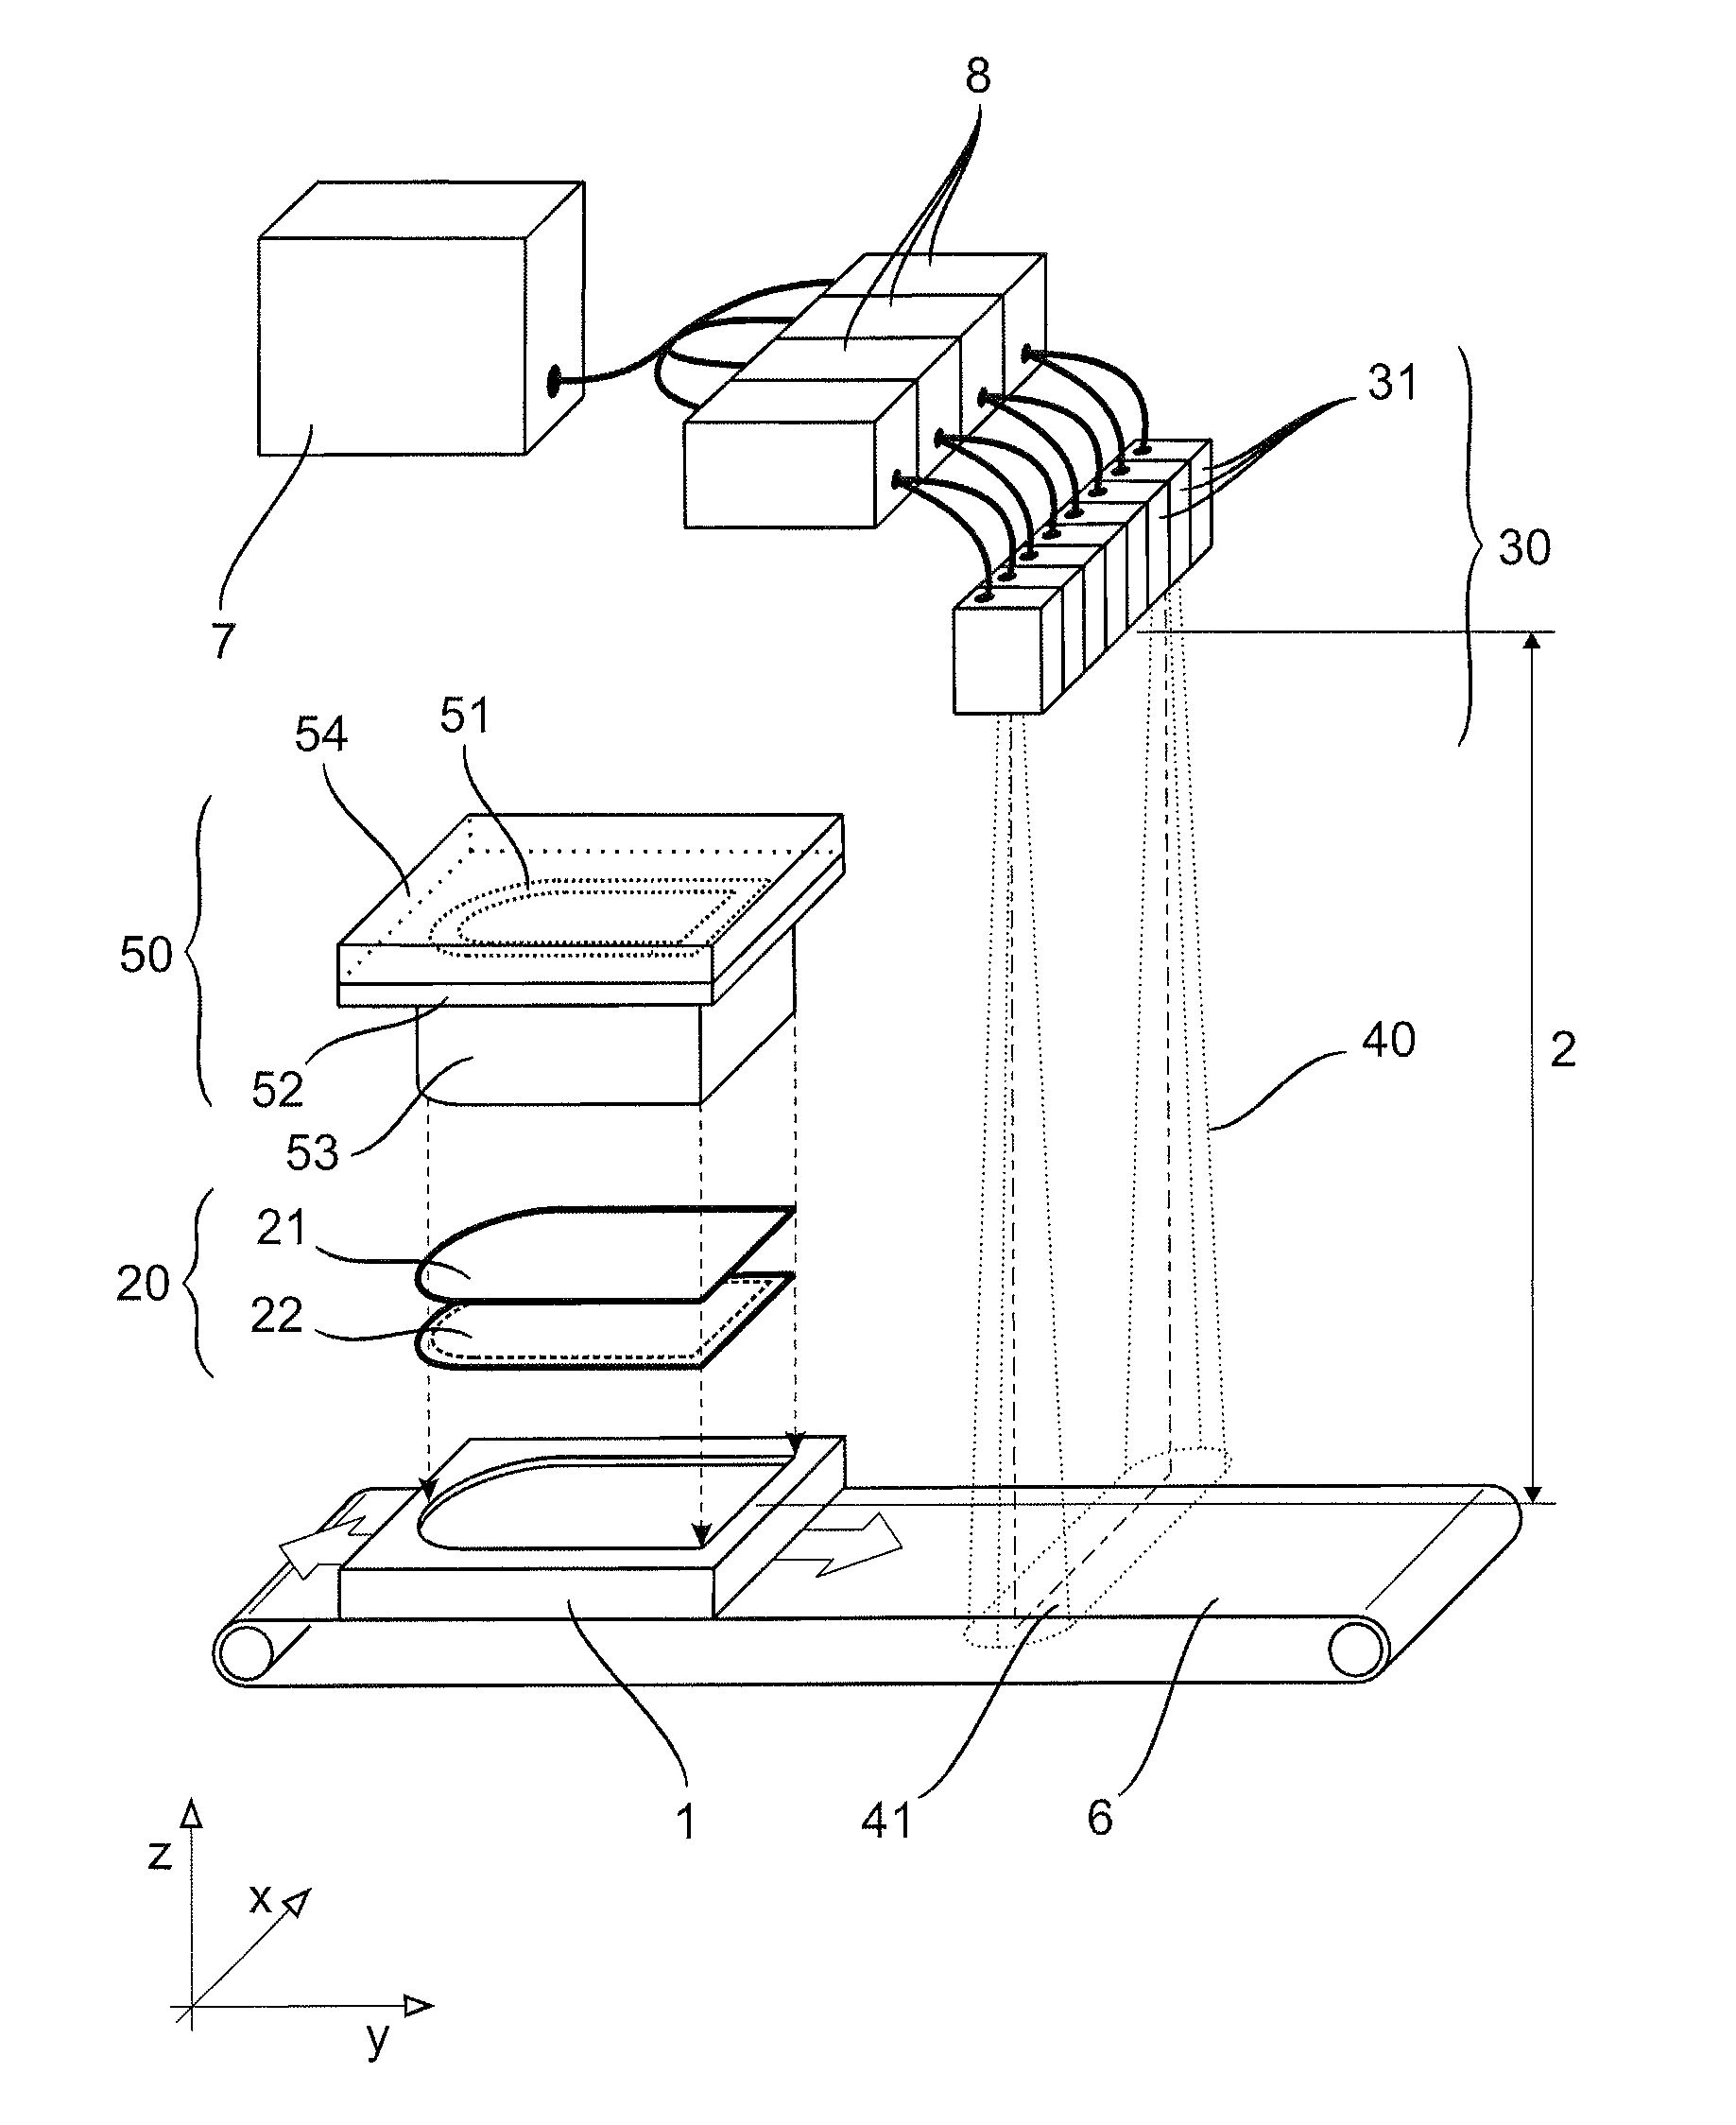 Apparatus for joining two workpiece parts along a weld by means of transmission welding